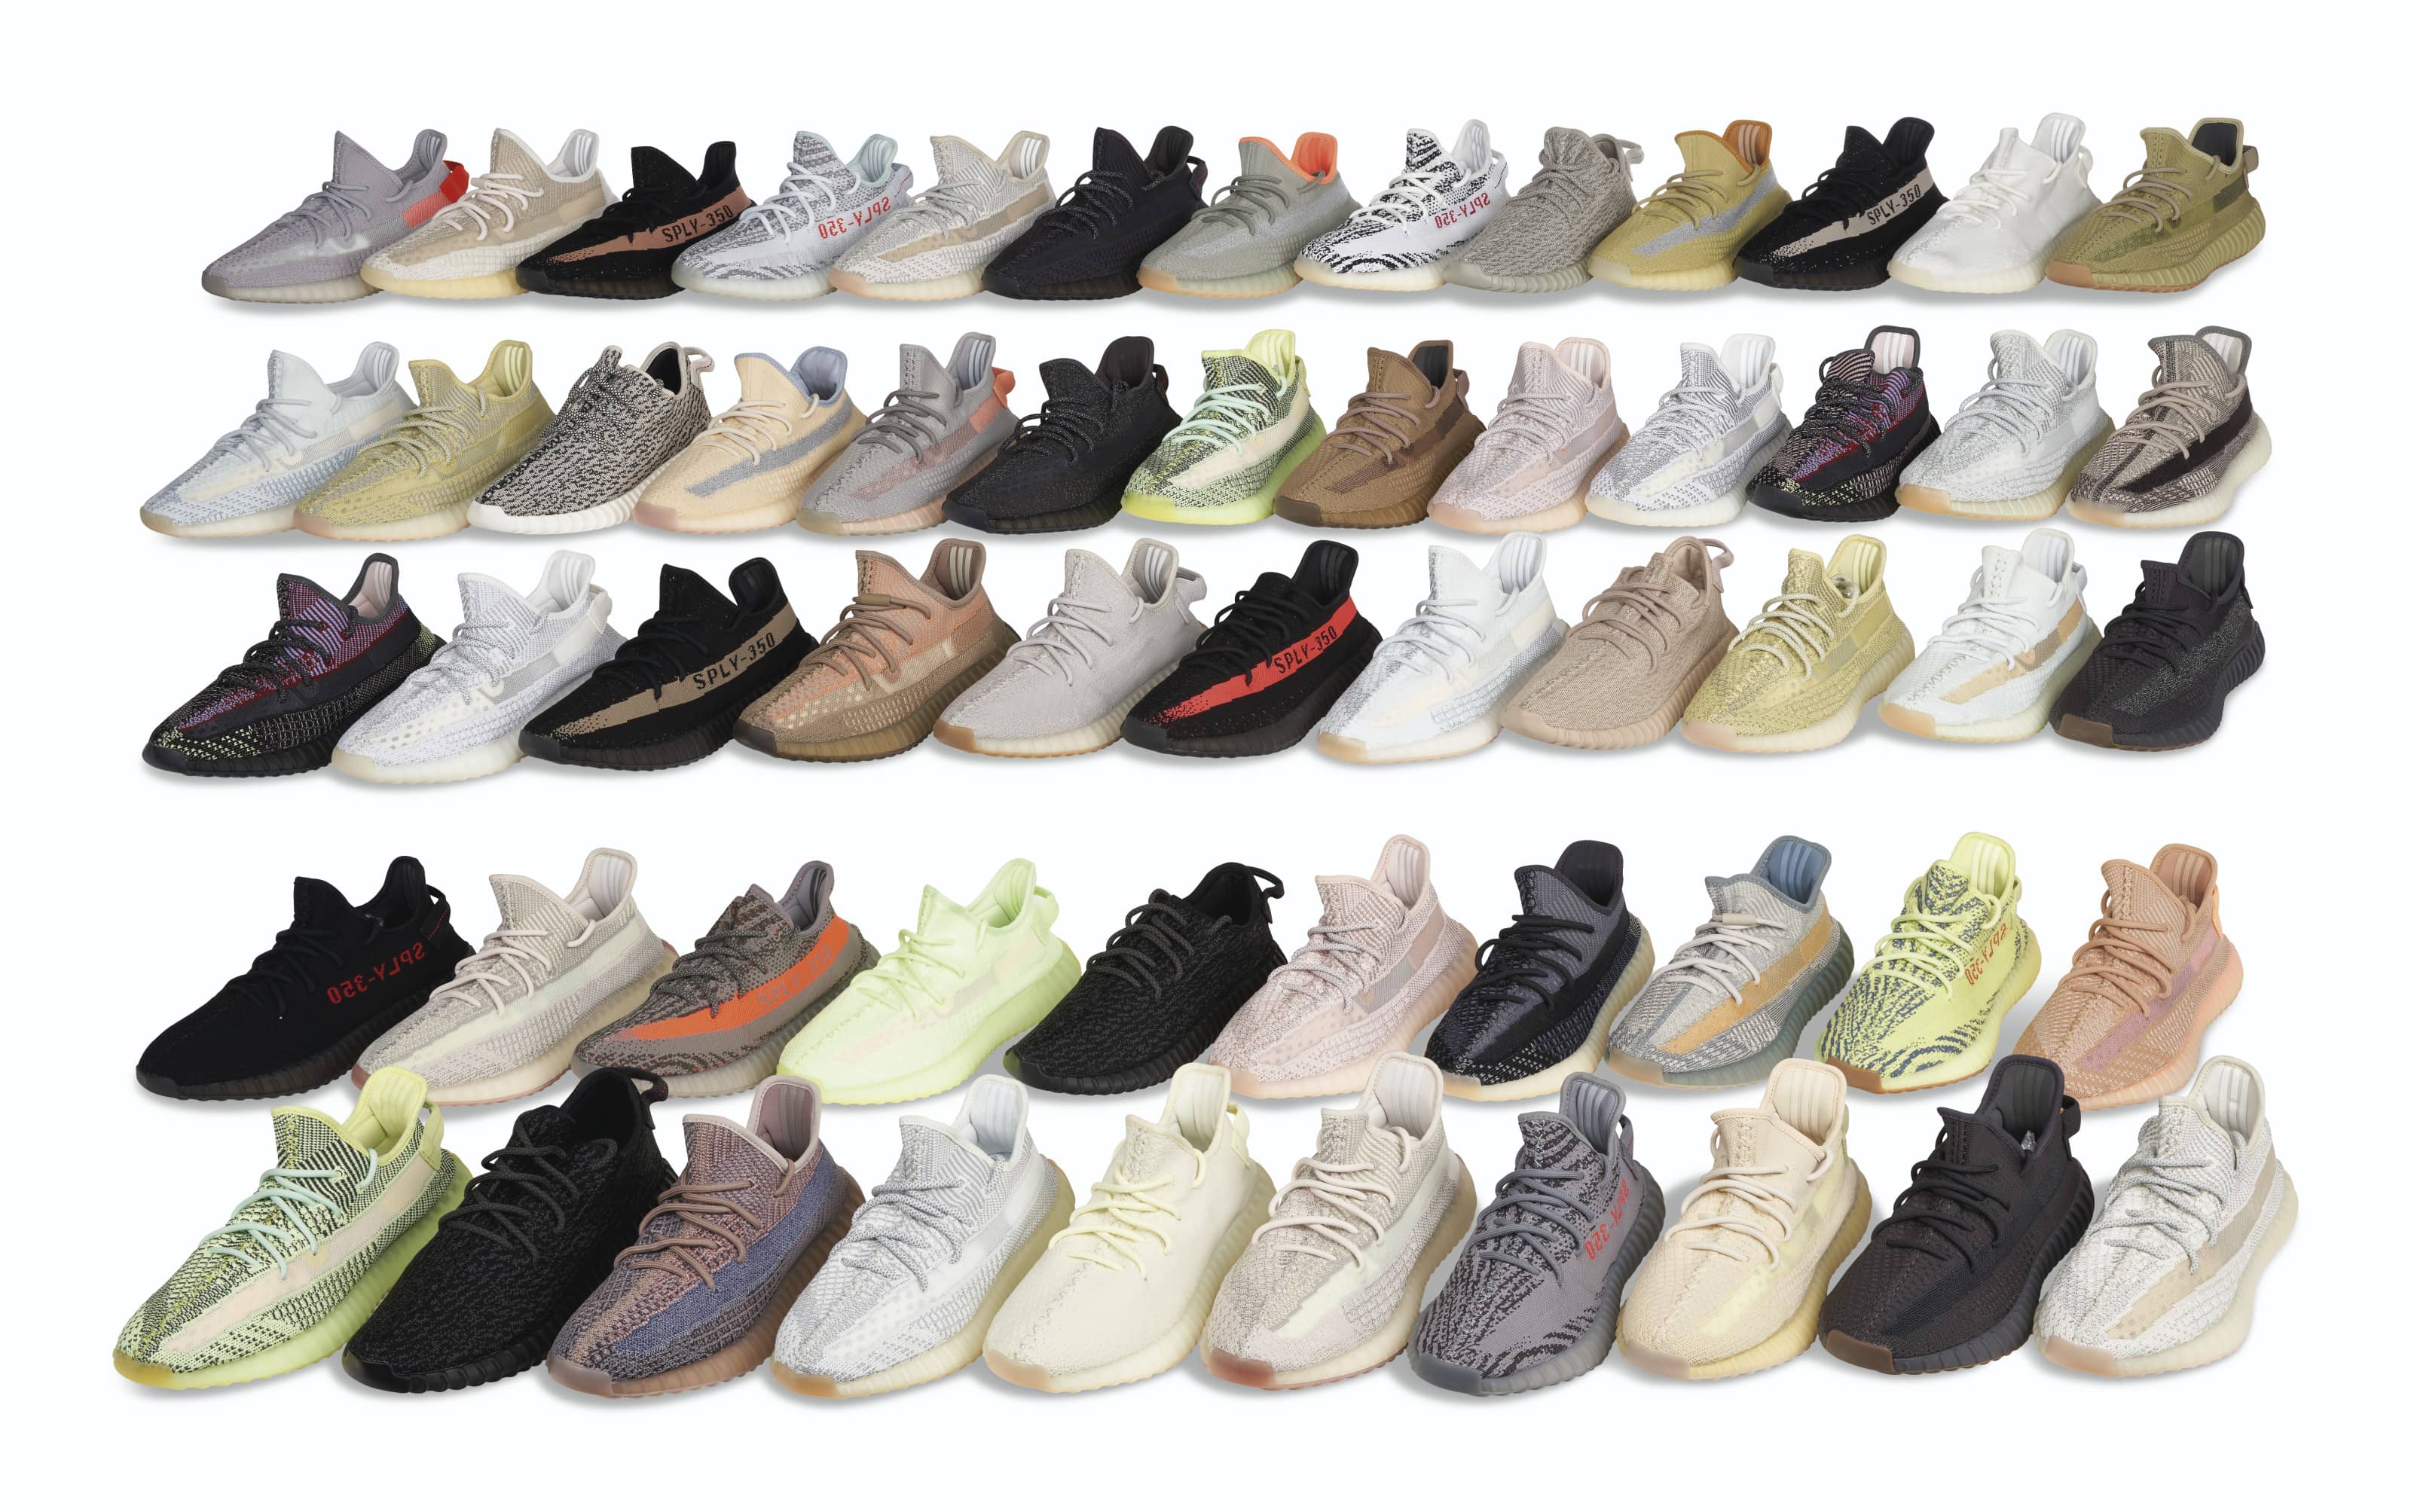 A Complete Collection of adidas YEEZY 350 Sneakers